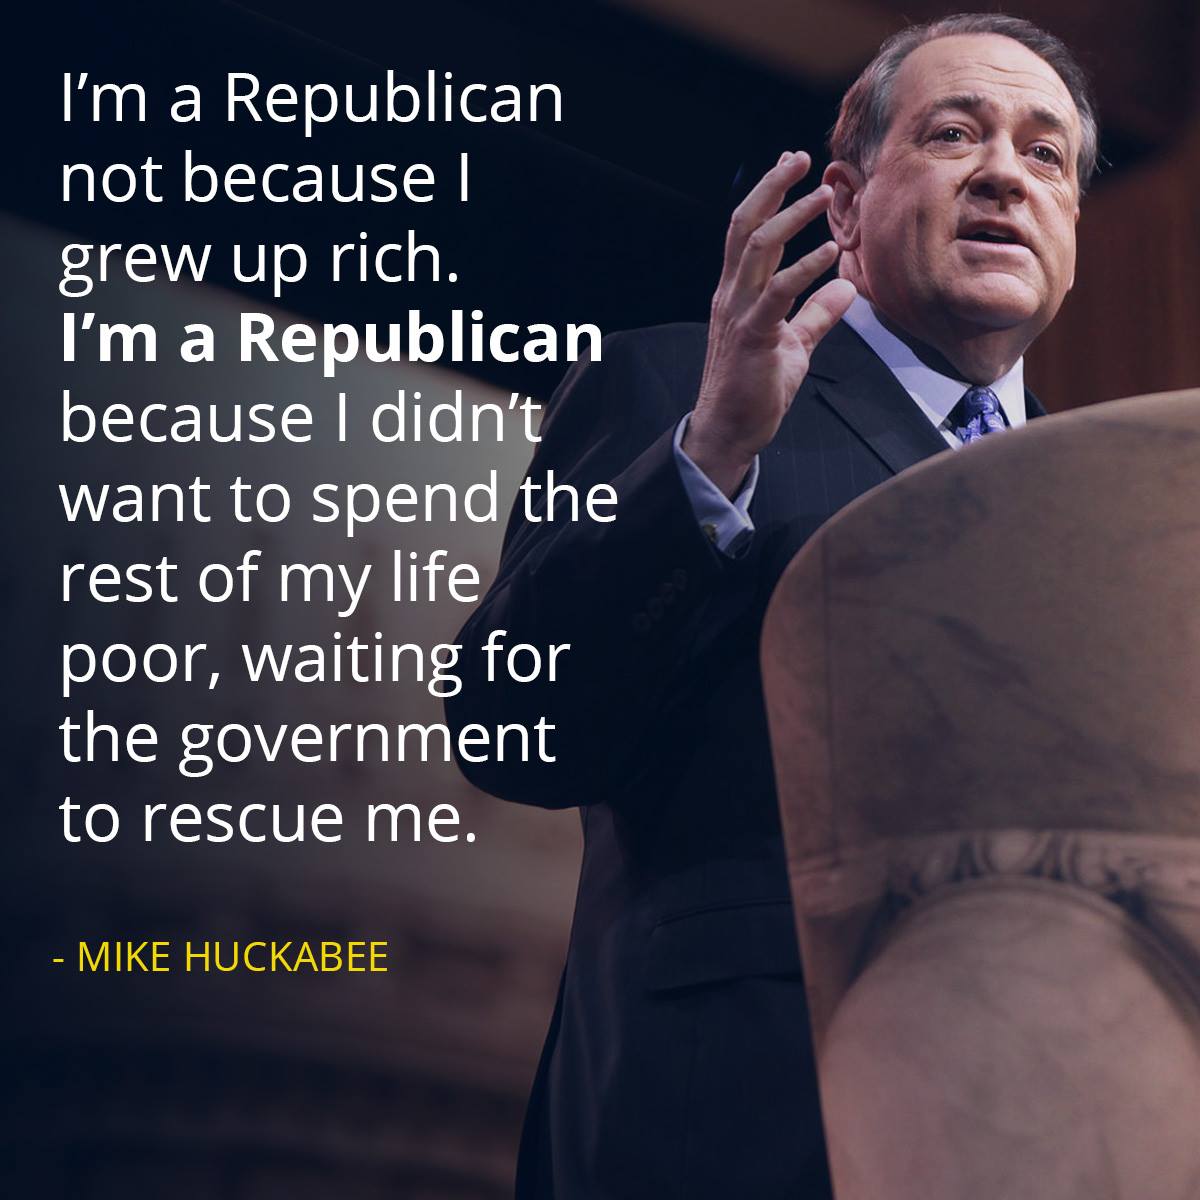 im-a-republican-because-i-didnt-want-to-spend-the-rest-of-my-life-poor-waiting-for-the-government-to-rescue-me